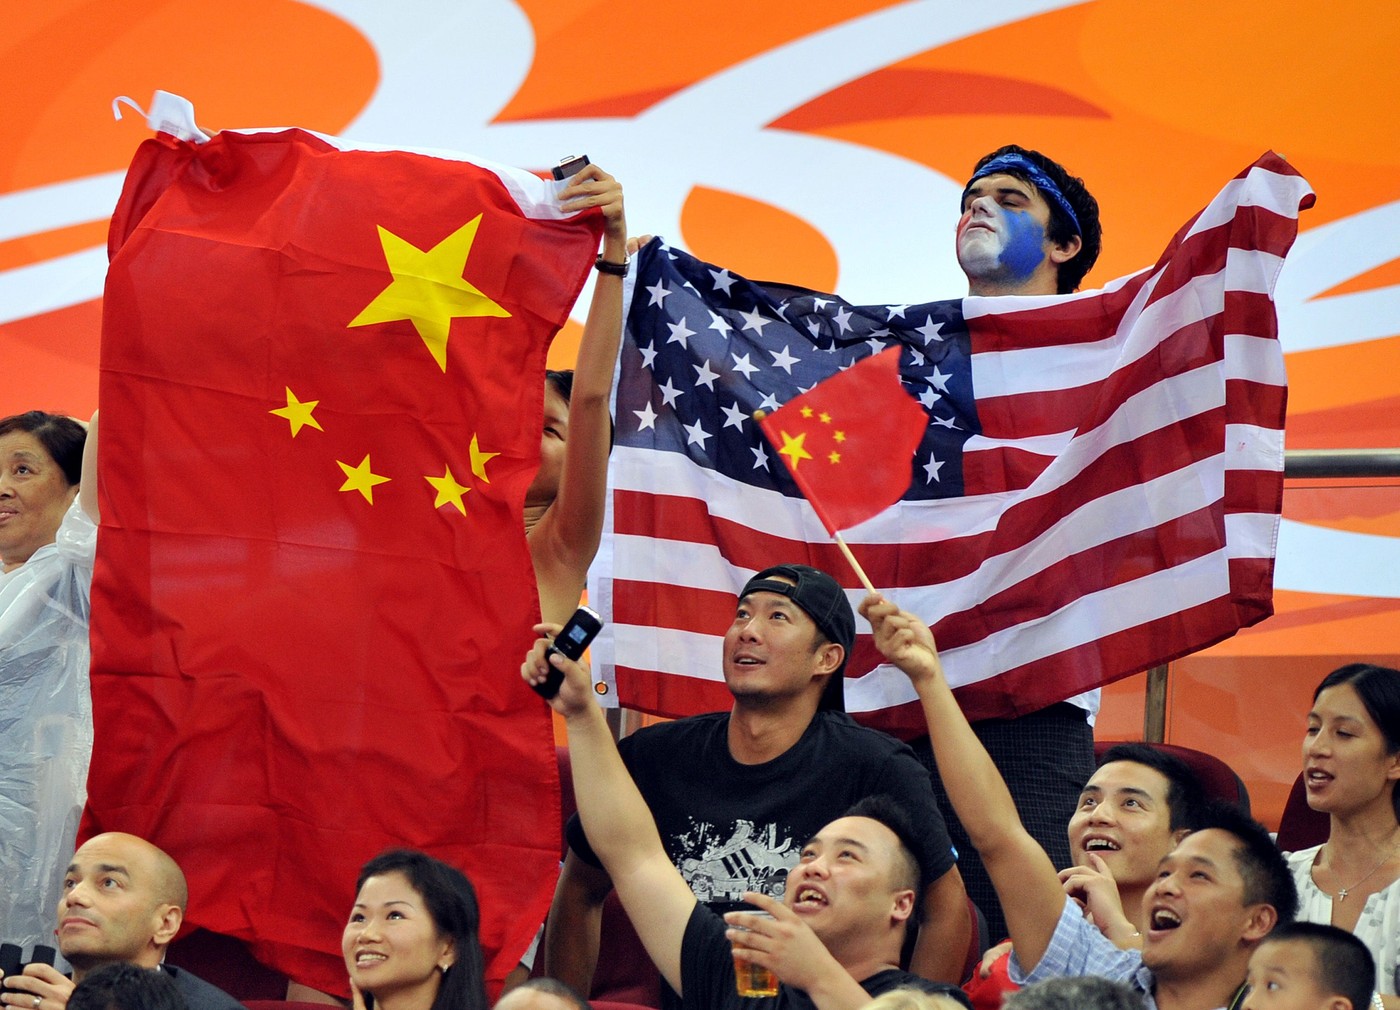 Aug. 9, 2008 - China's National flag and the US flag are displayed by fans in the 2nd quarter of their opening round contest at Olympic Basketball Stadium in the Games of the the XXIX Olympiad in Beijing, China. USA defeated China 101-70. (Joe Rimkus, Jr/Miami Herald/MCT), Image: 212413407, License: Rights-managed, Restrictions: , Model Release: no, Credit line: Profimedia, Zuma Press - Archives